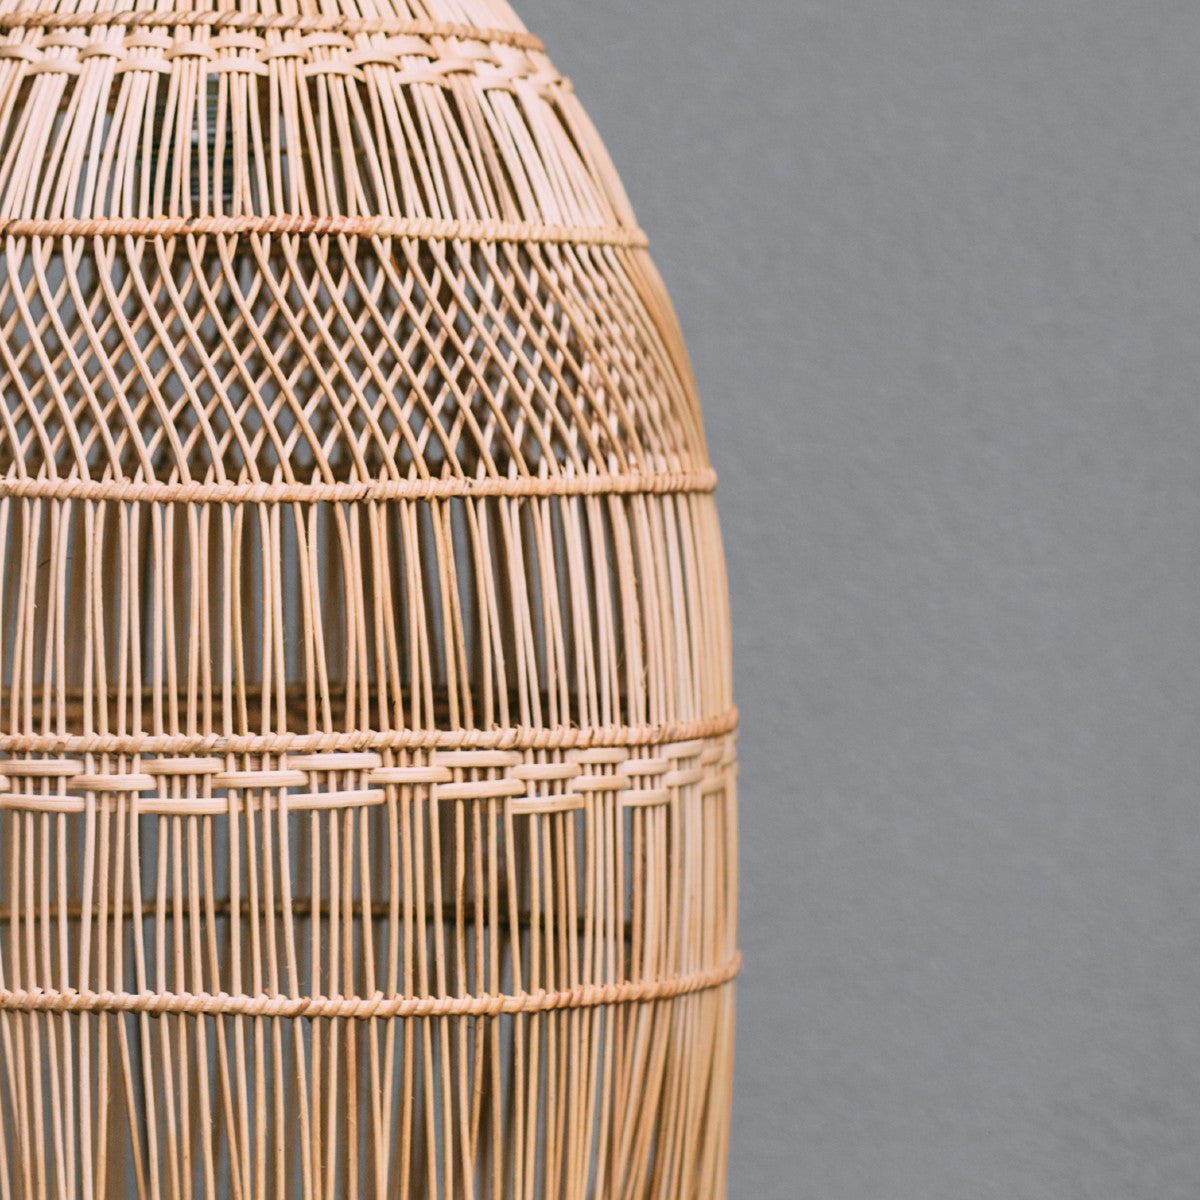 rattan boho light. rattan pendant lighting. close up photo shows the detail in the weave with a mixture of straight lines and a criss cross pattern